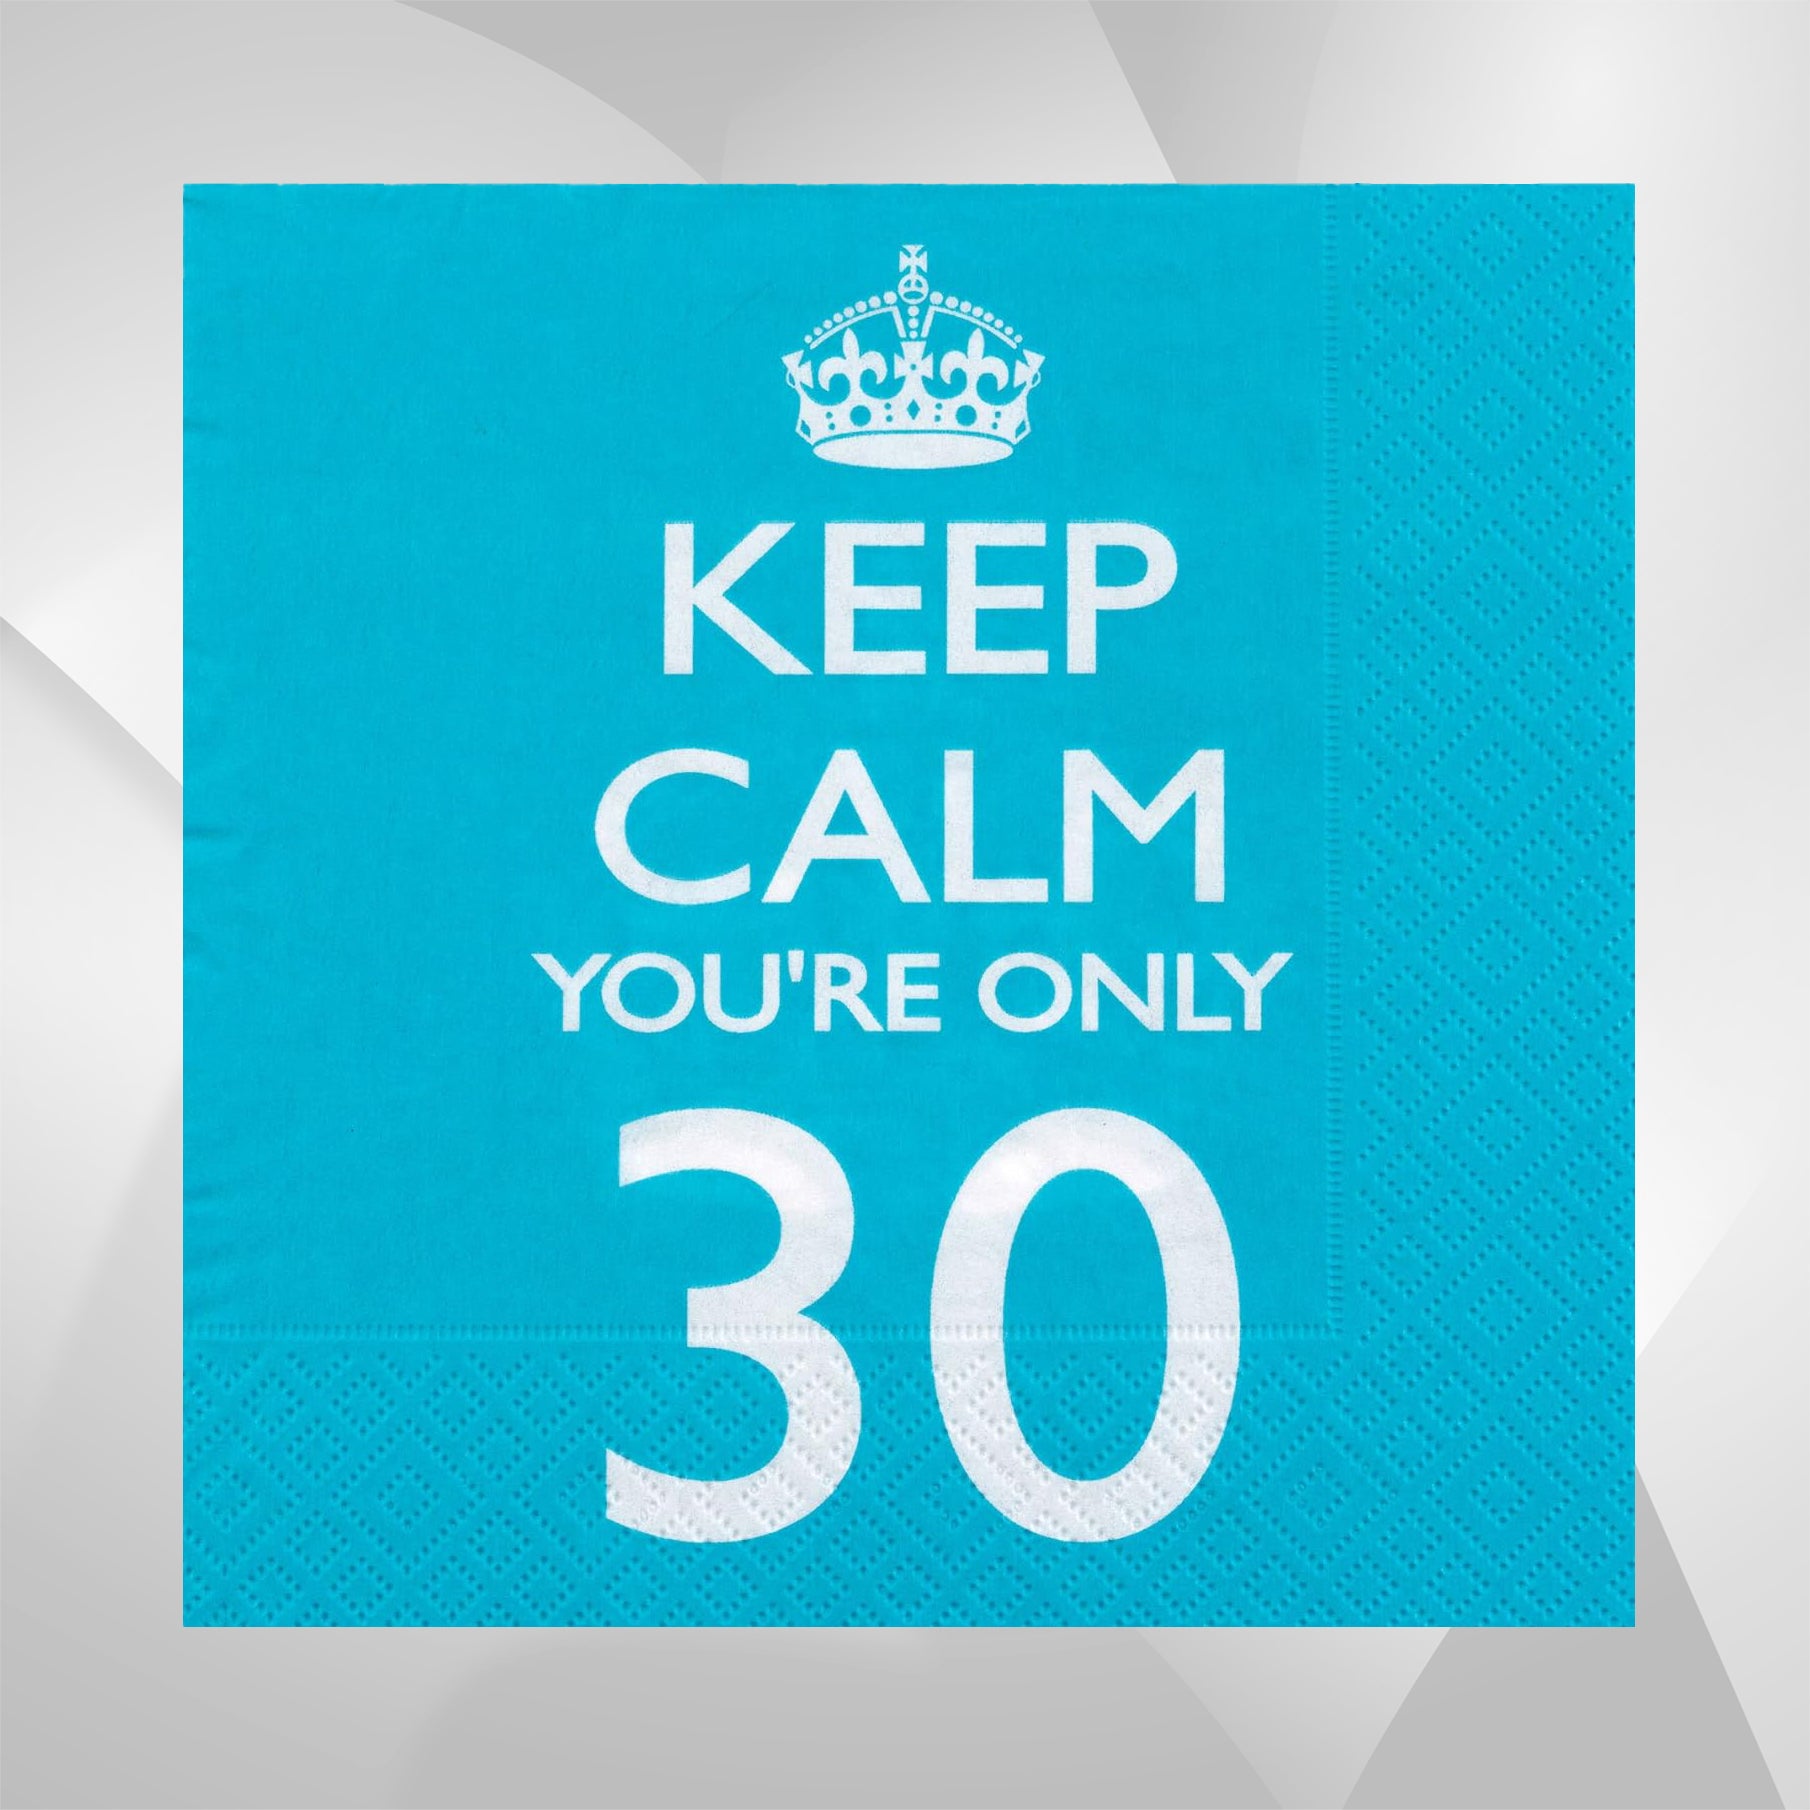 Keep Calm You're Only 30 Paper Napkins - Pack of 16